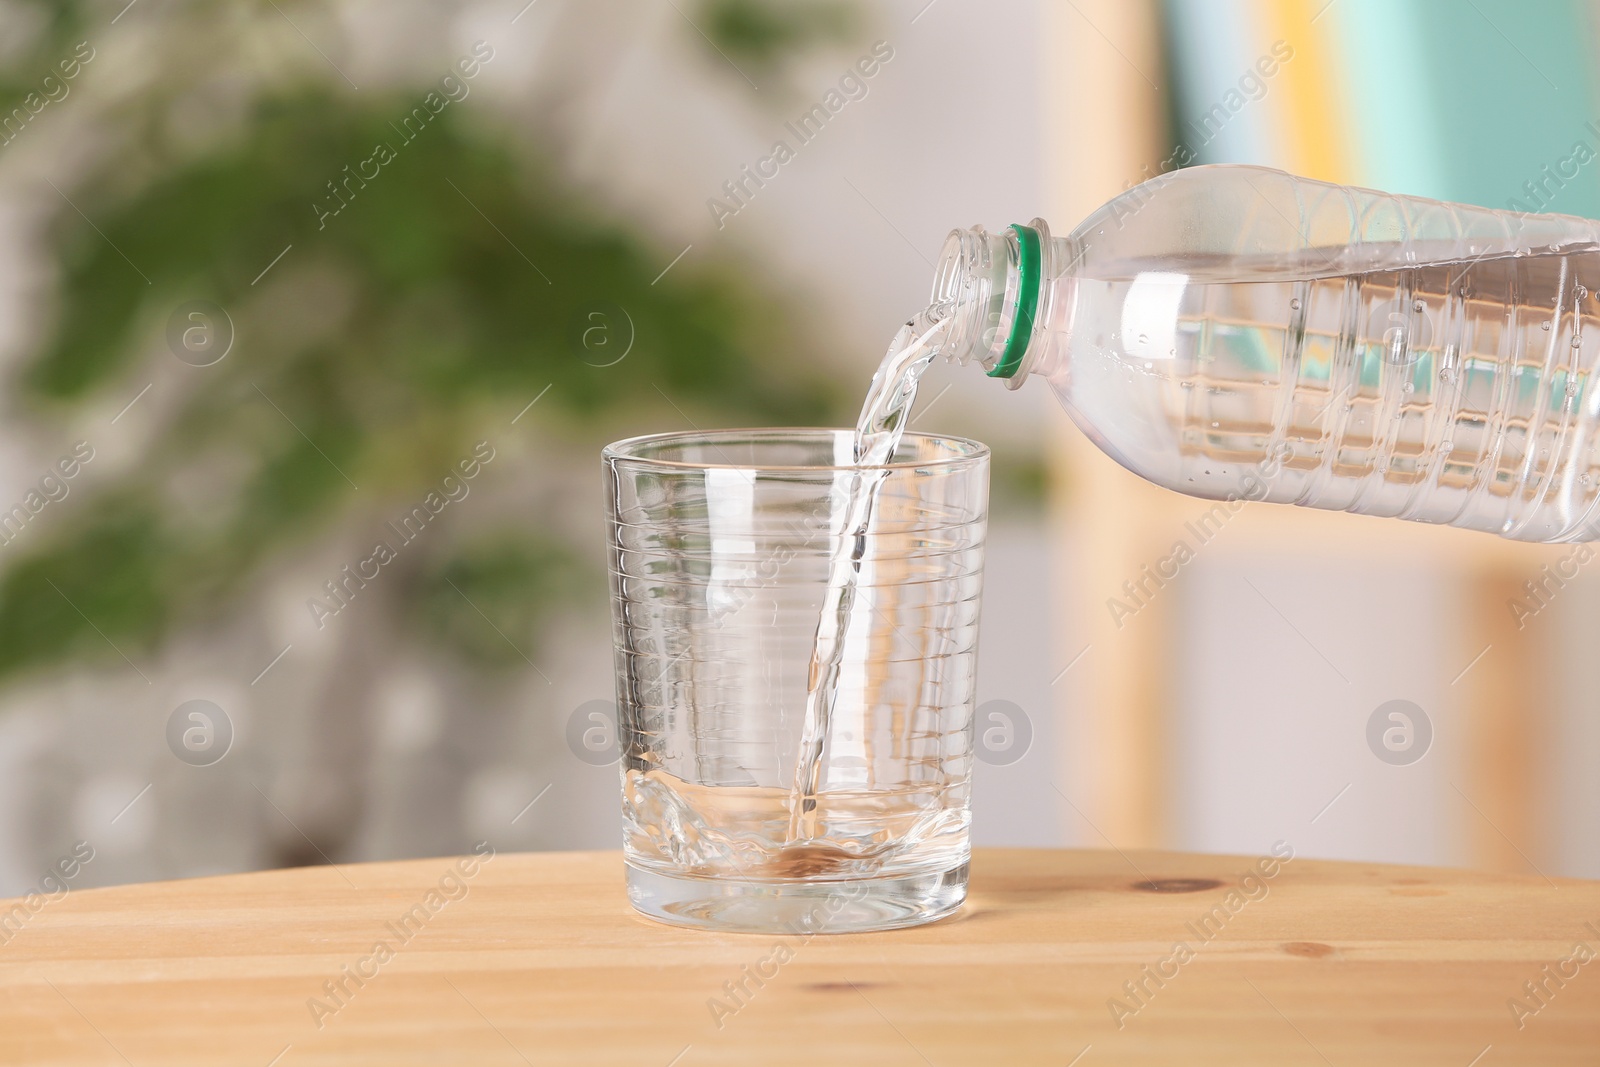 Photo of Pouring water from bottle into glass on table against blurred background